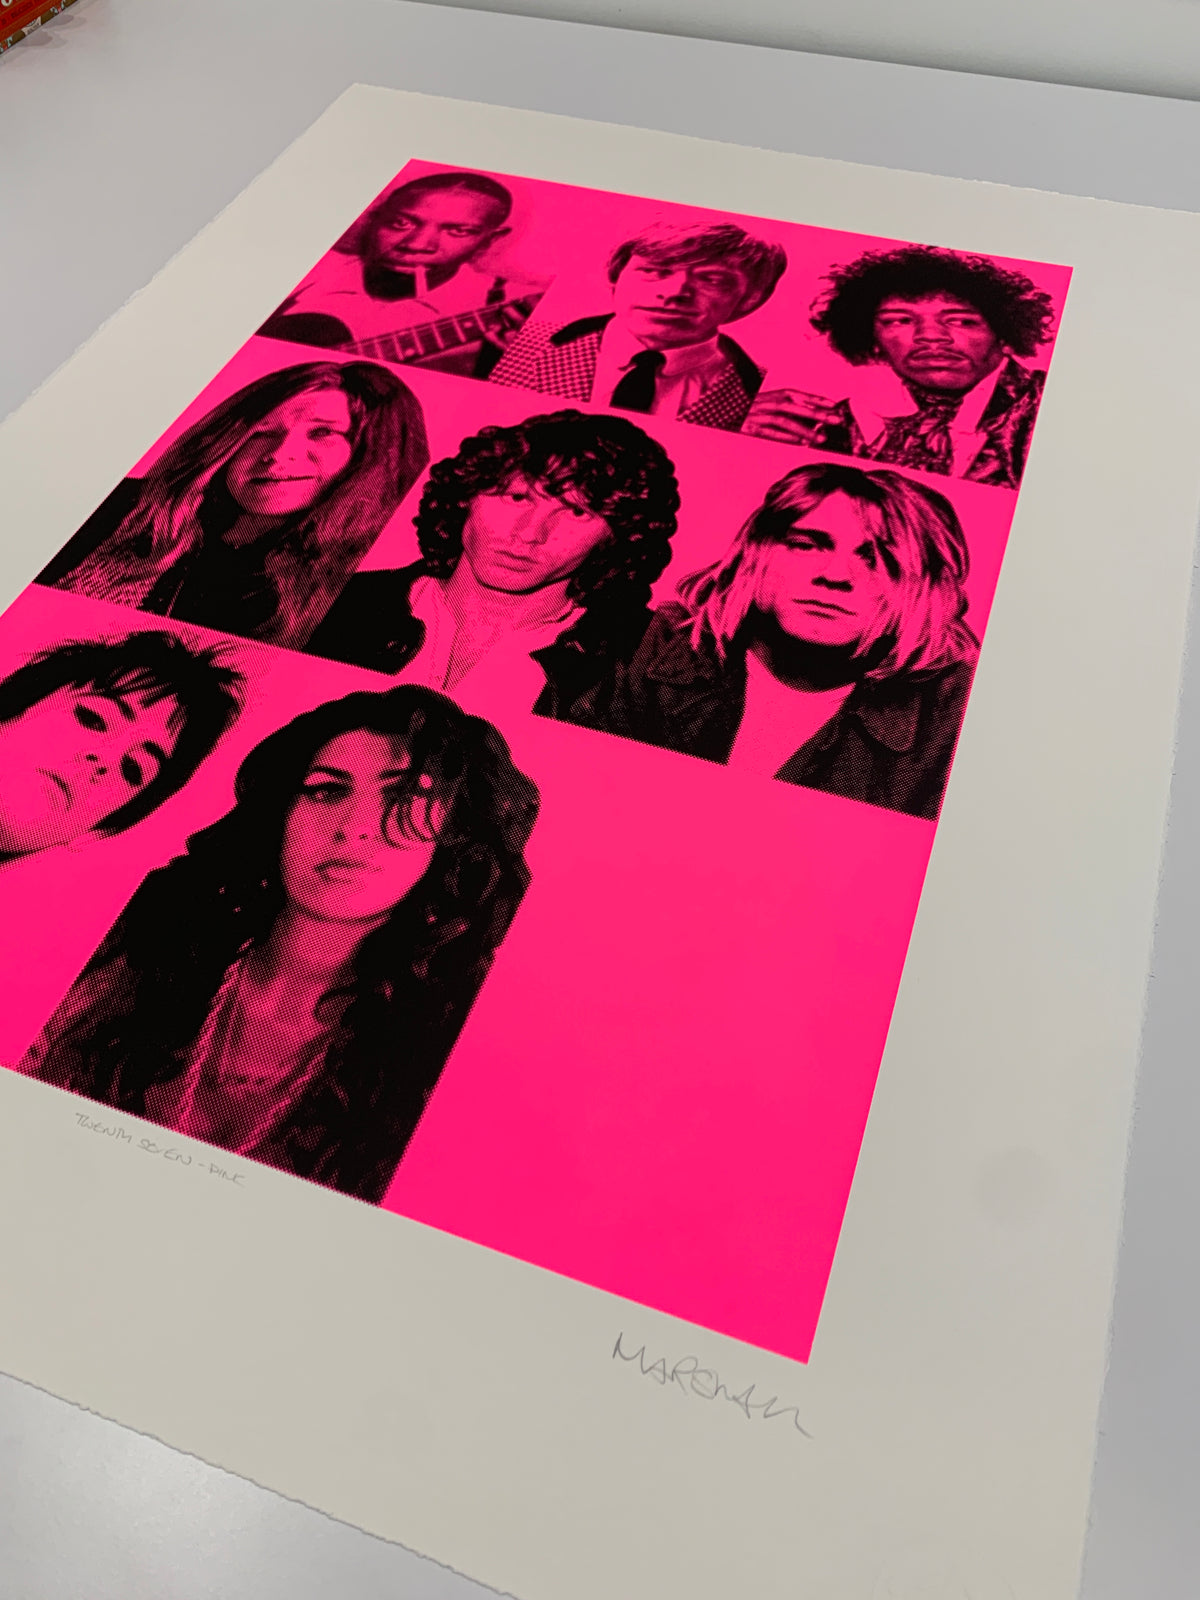 27 Club (Black and Pink)